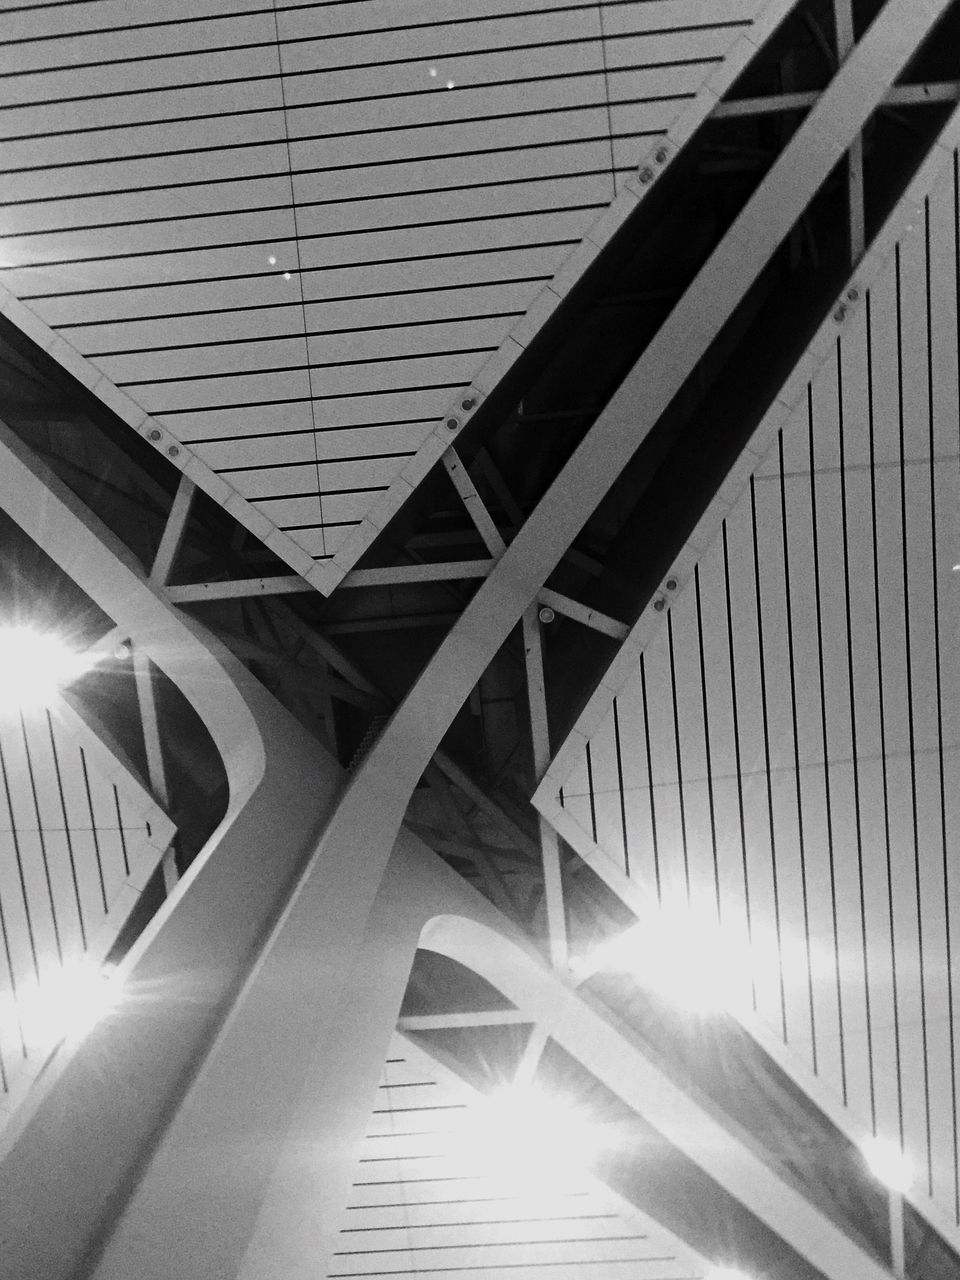 architecture, built structure, low angle view, indoors, ceiling, no people, bridge - man made structure, sunlight, illuminated, modern, underneath, day